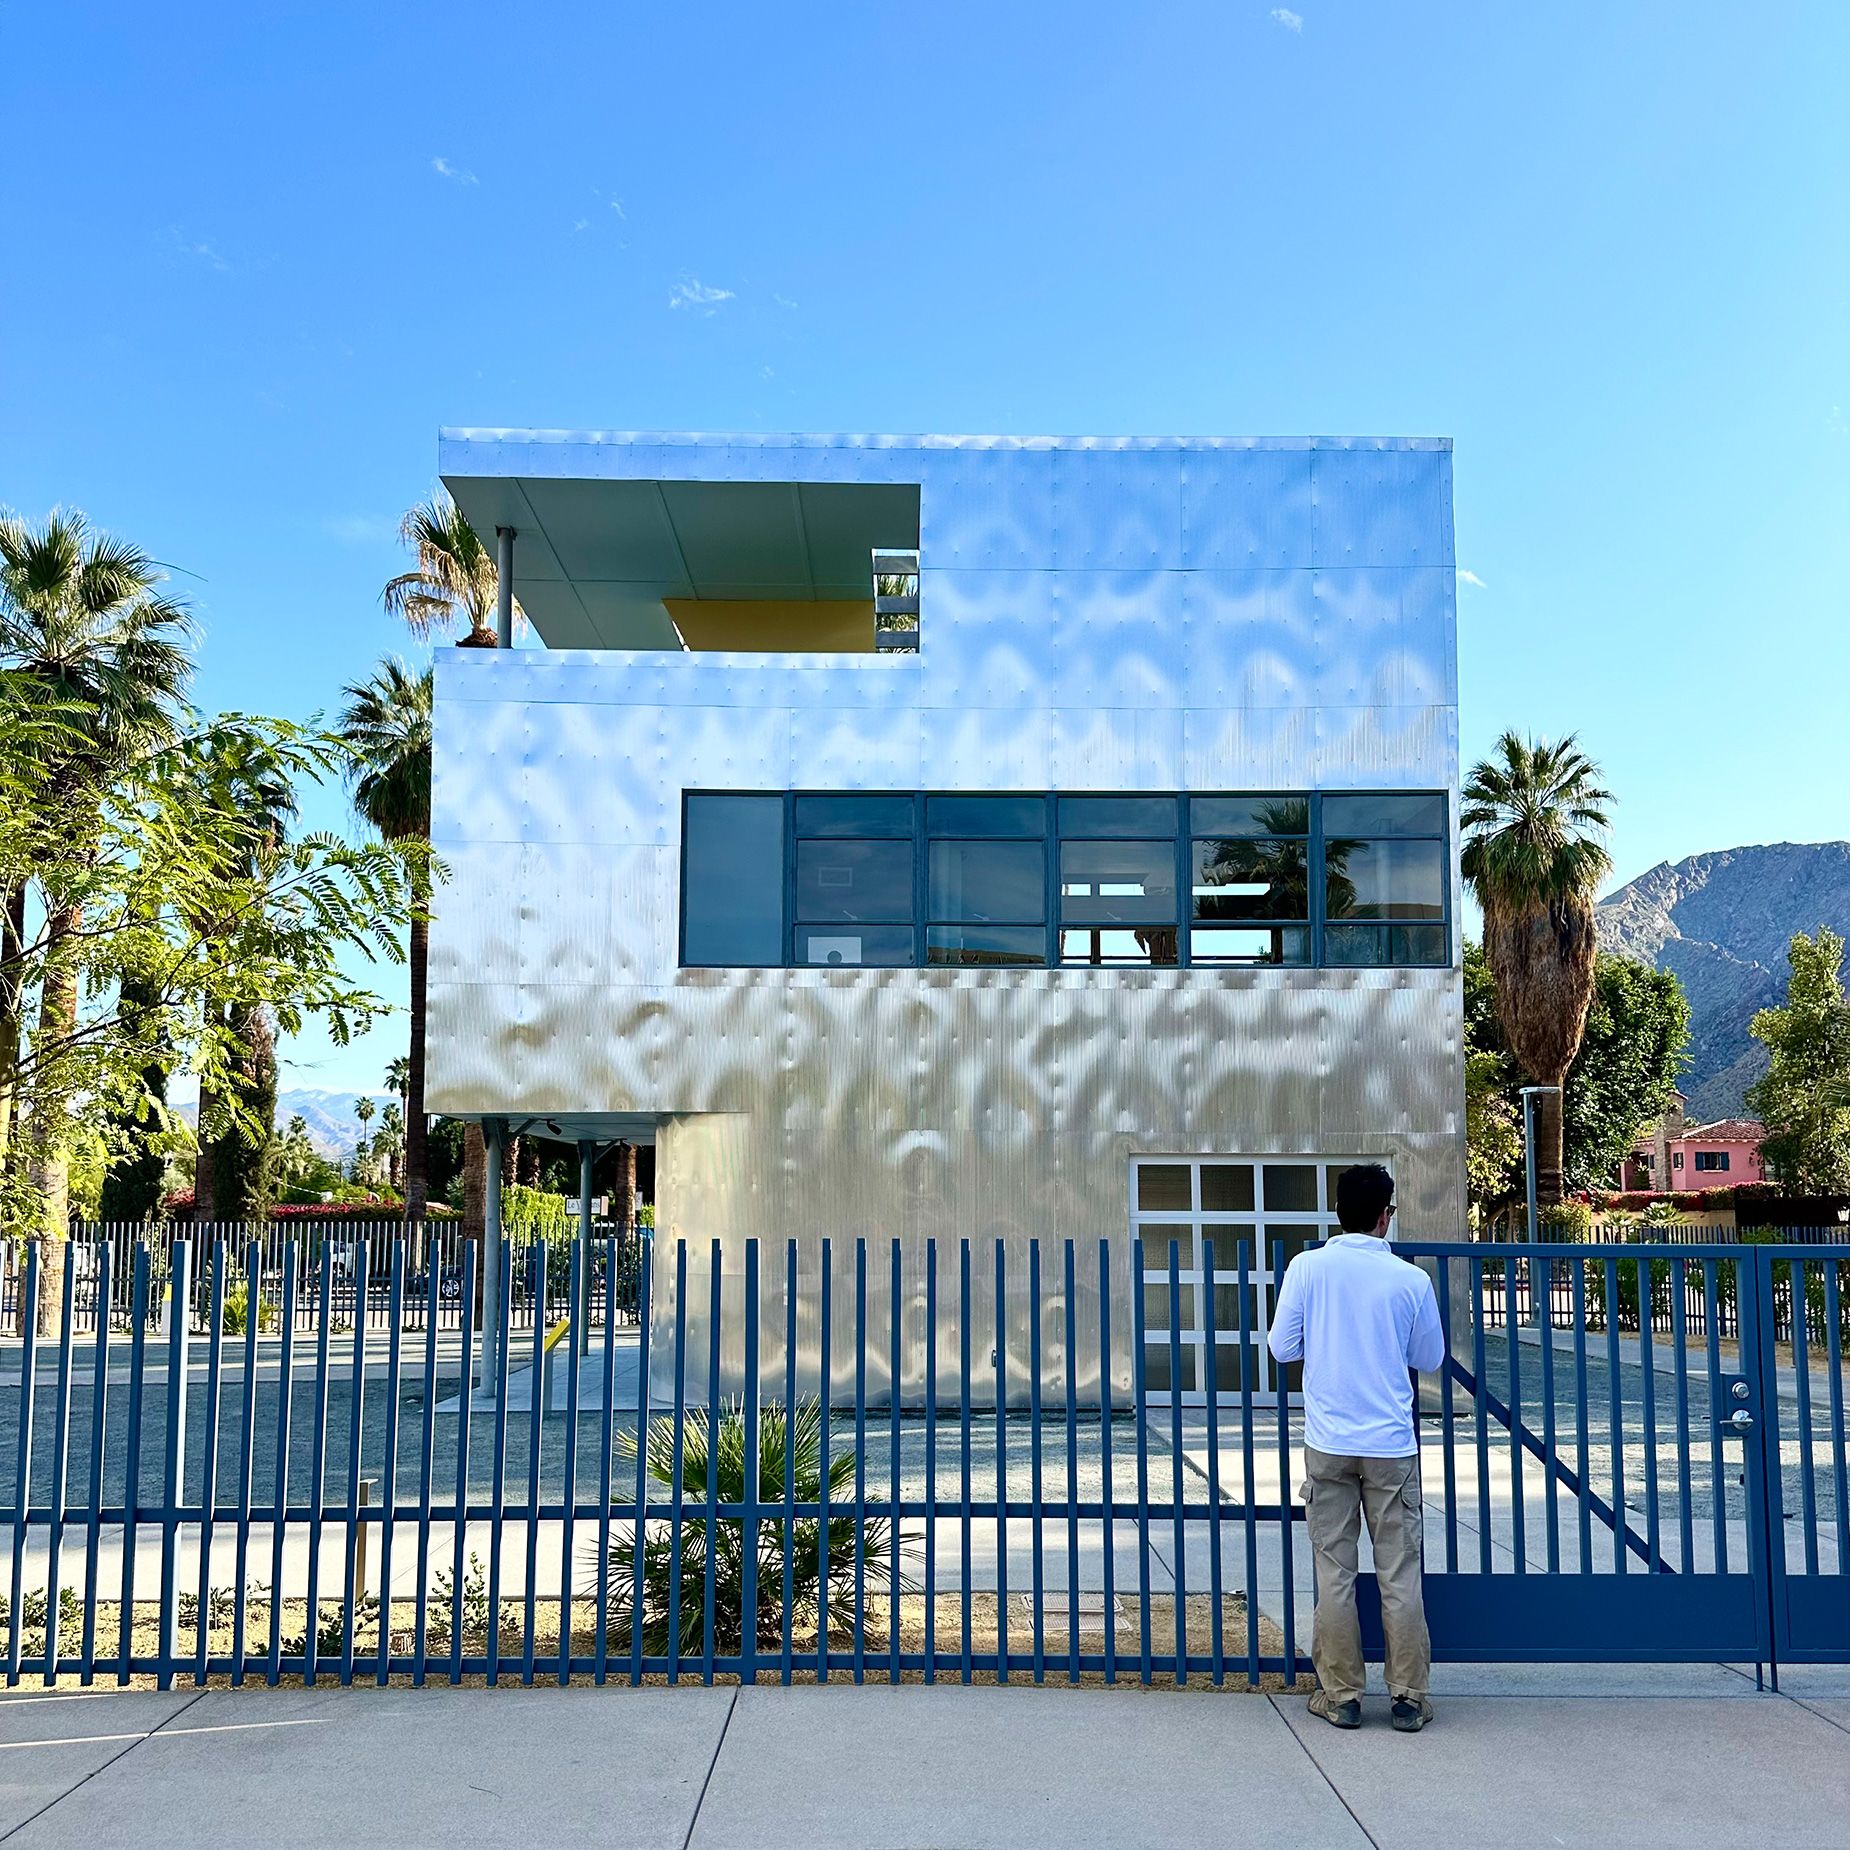 "Aluminaire House" affirms a commitment to uplifting humble building materials in modular architecture.